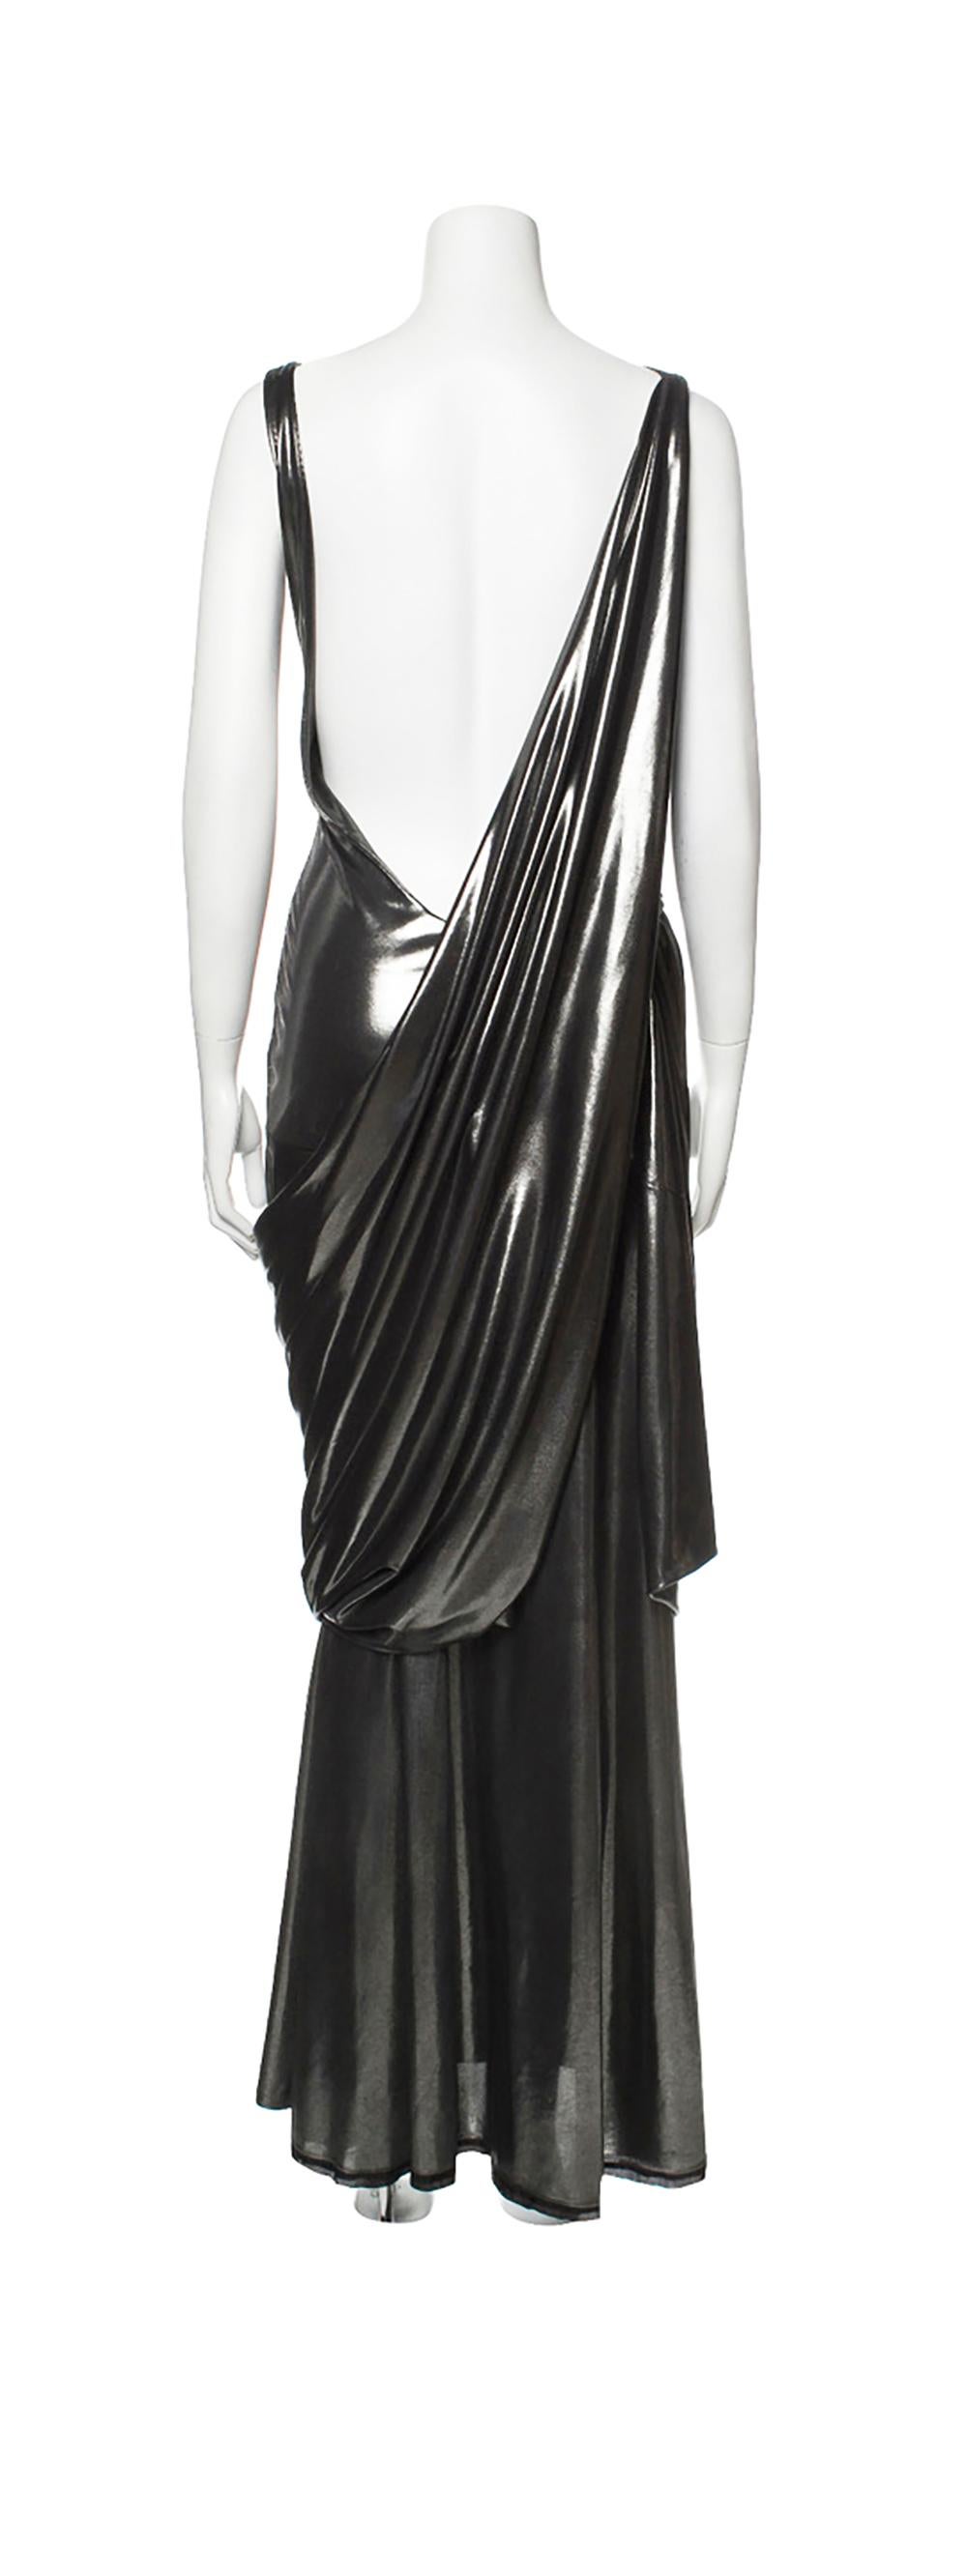 Late 1980s - early 1990s Gianni Versace Metallic Grecian Evening Gown by Gianni Versace
Sleeveless gown with cowl neck
stretch fabric
low back
condition: very good
size S
measurements taken un-stretched : Bust: 31